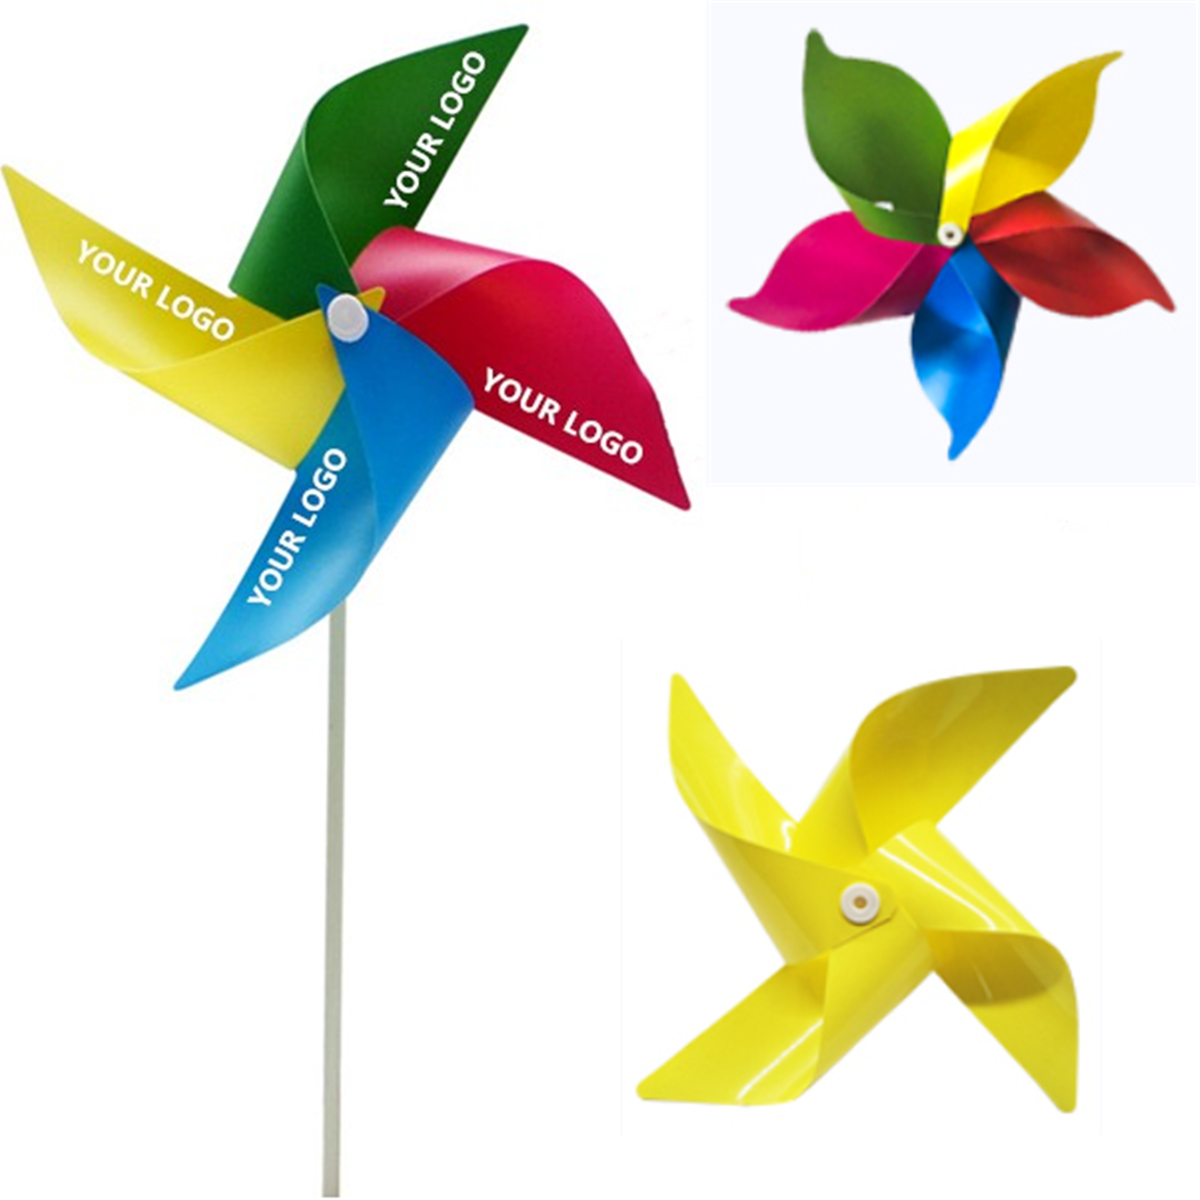 Toy Windmill 4 Leaves 4 Colors Pinwheel With Plastic Stick WPRQ9173